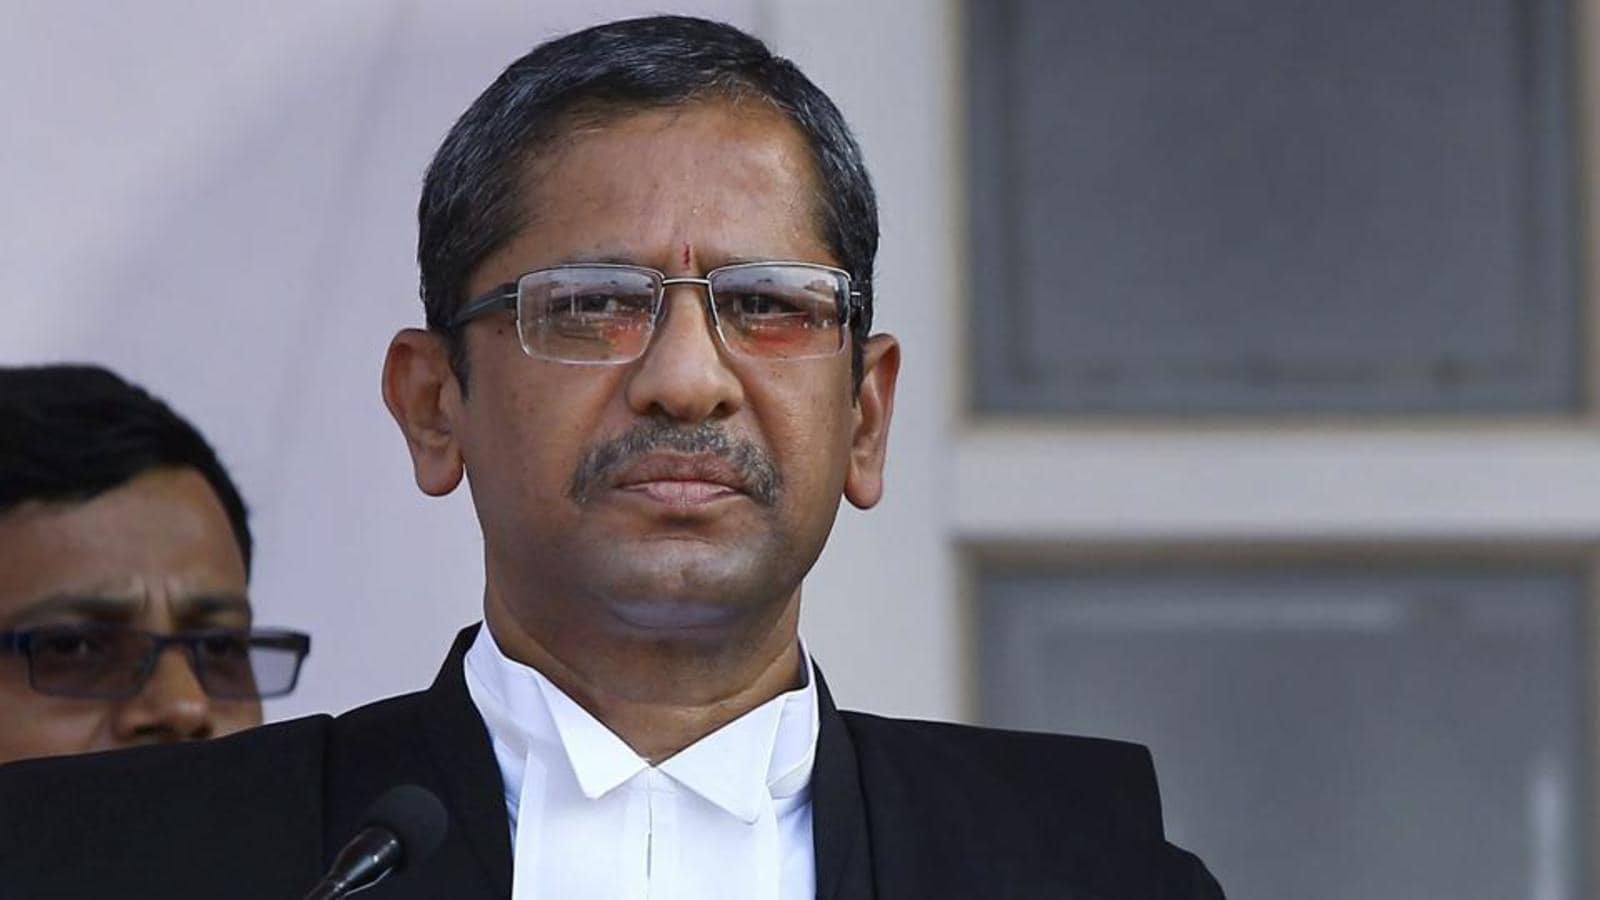 CJI Says Police Custody Poses The "Highest Threat" To Human Rights